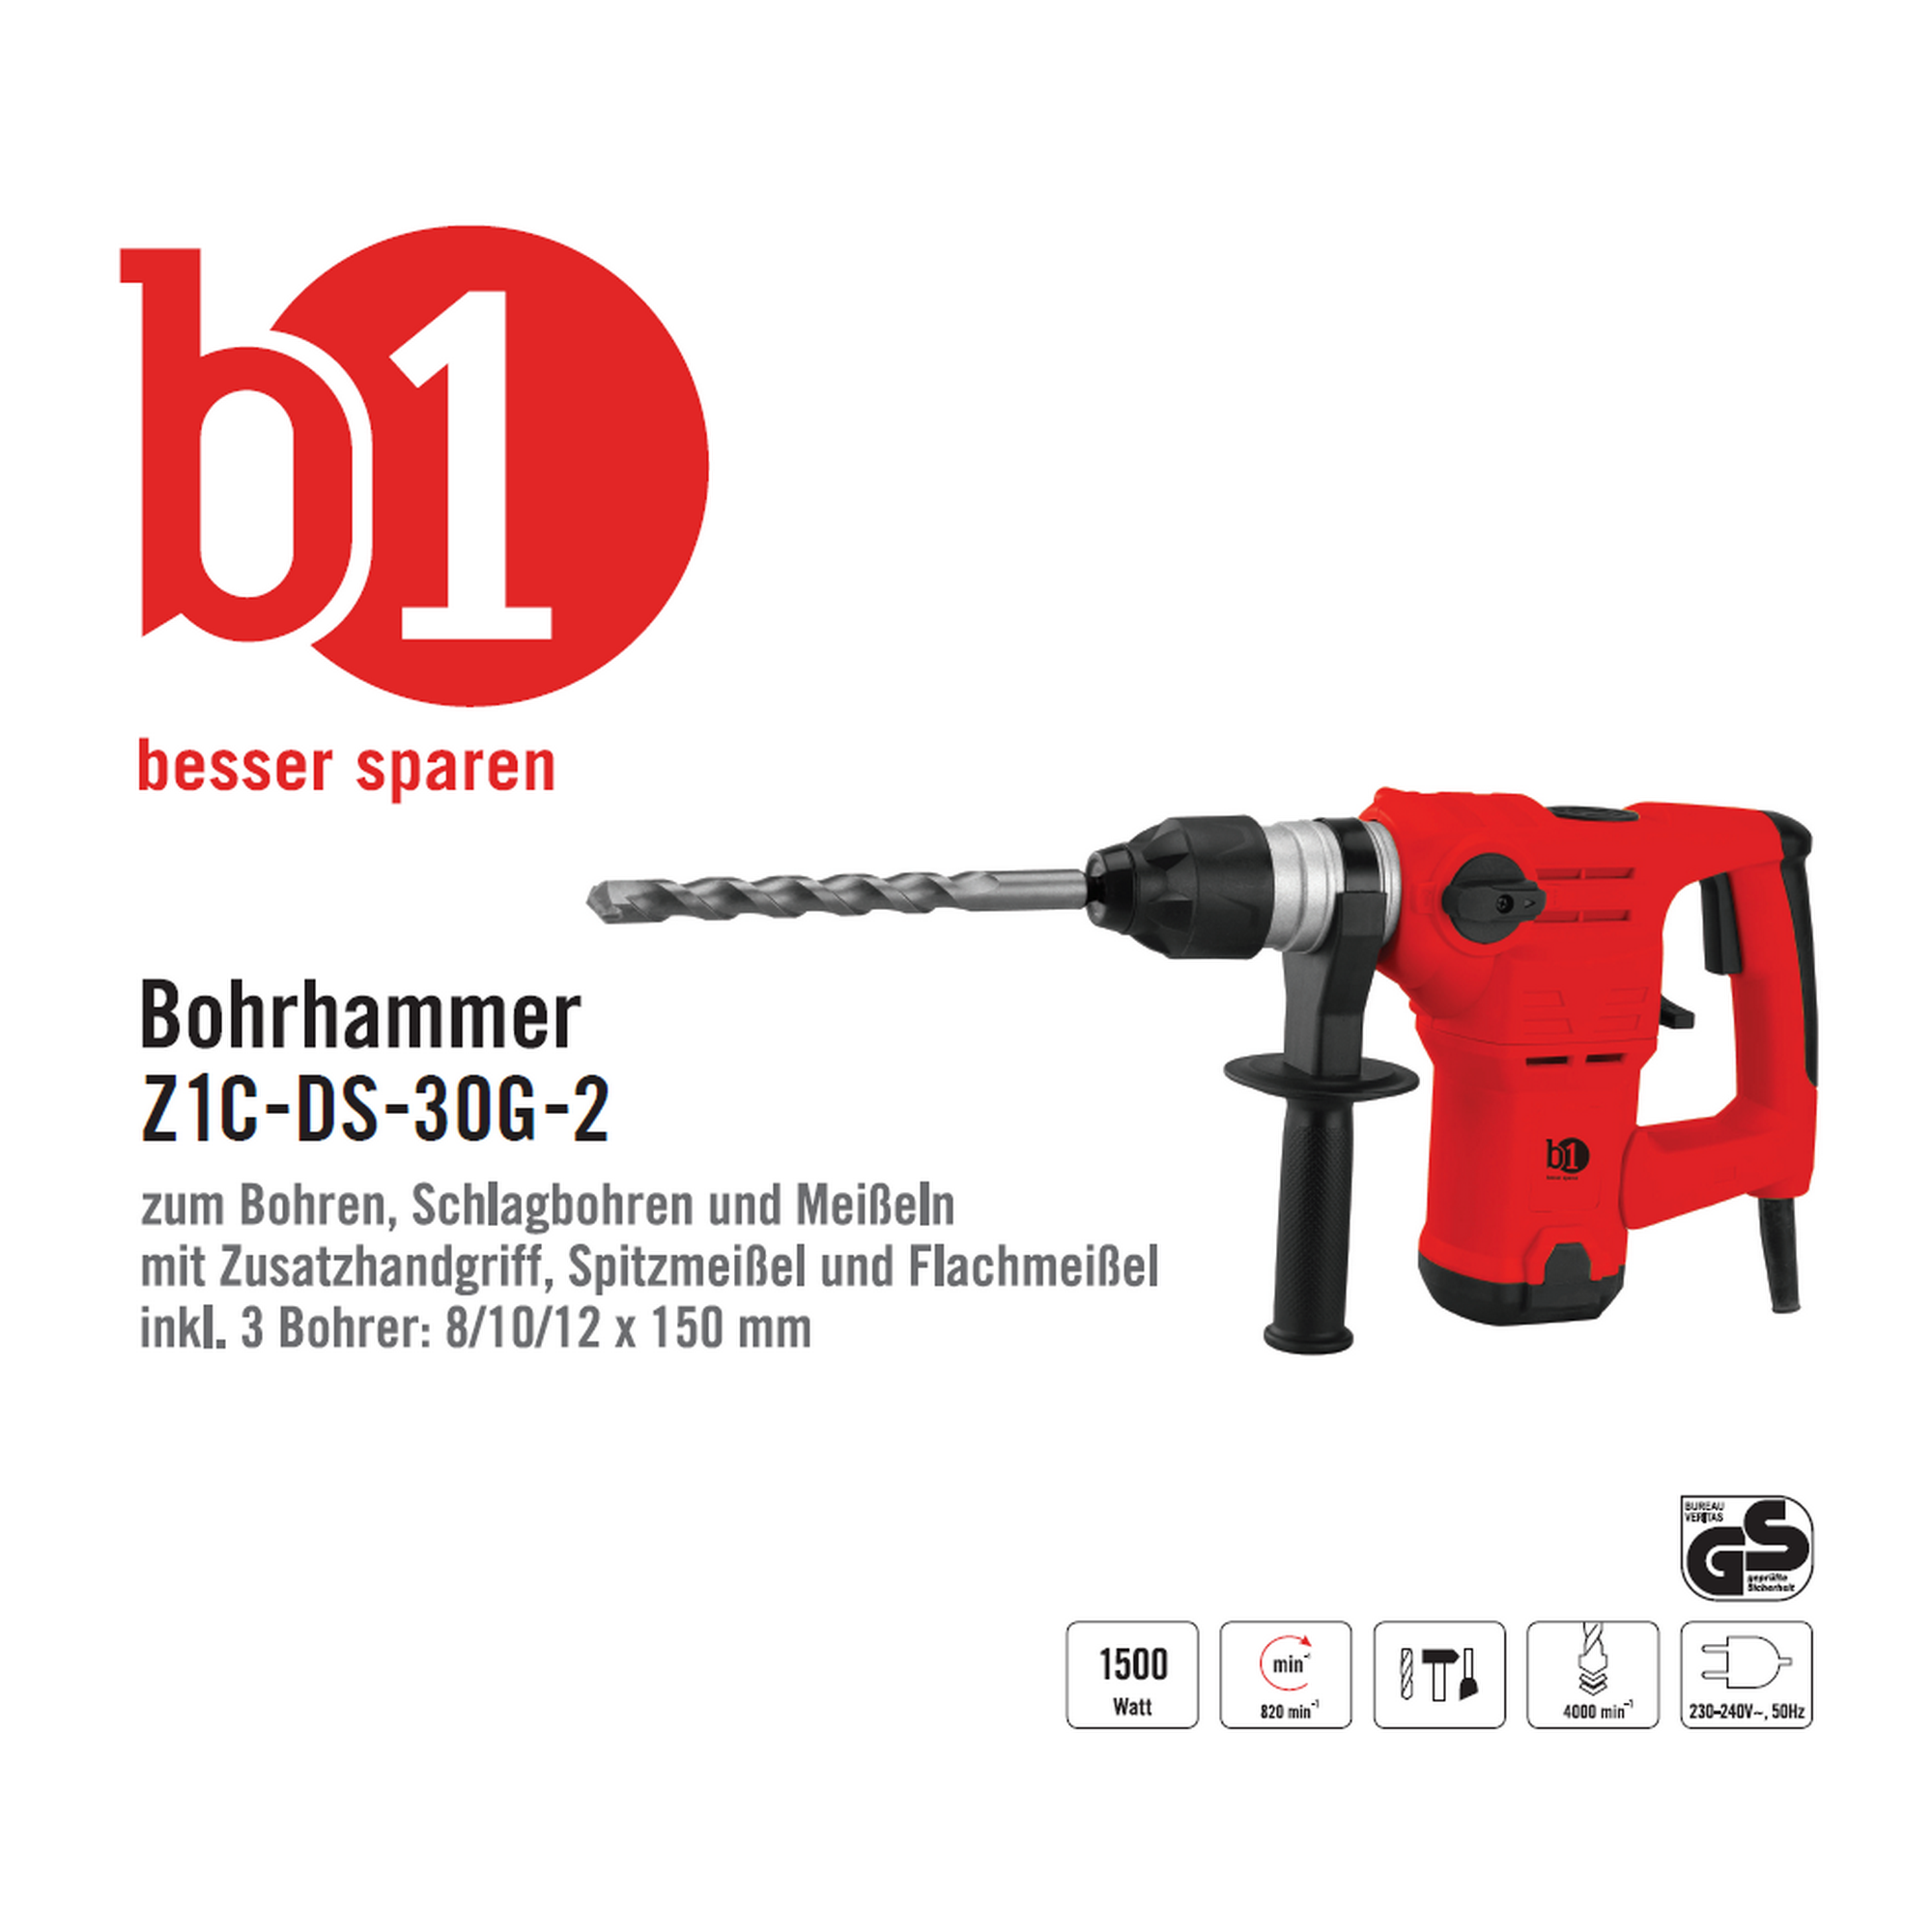 Bohrhammer 'Z1C-DS-30G-2' 1500 W + product picture